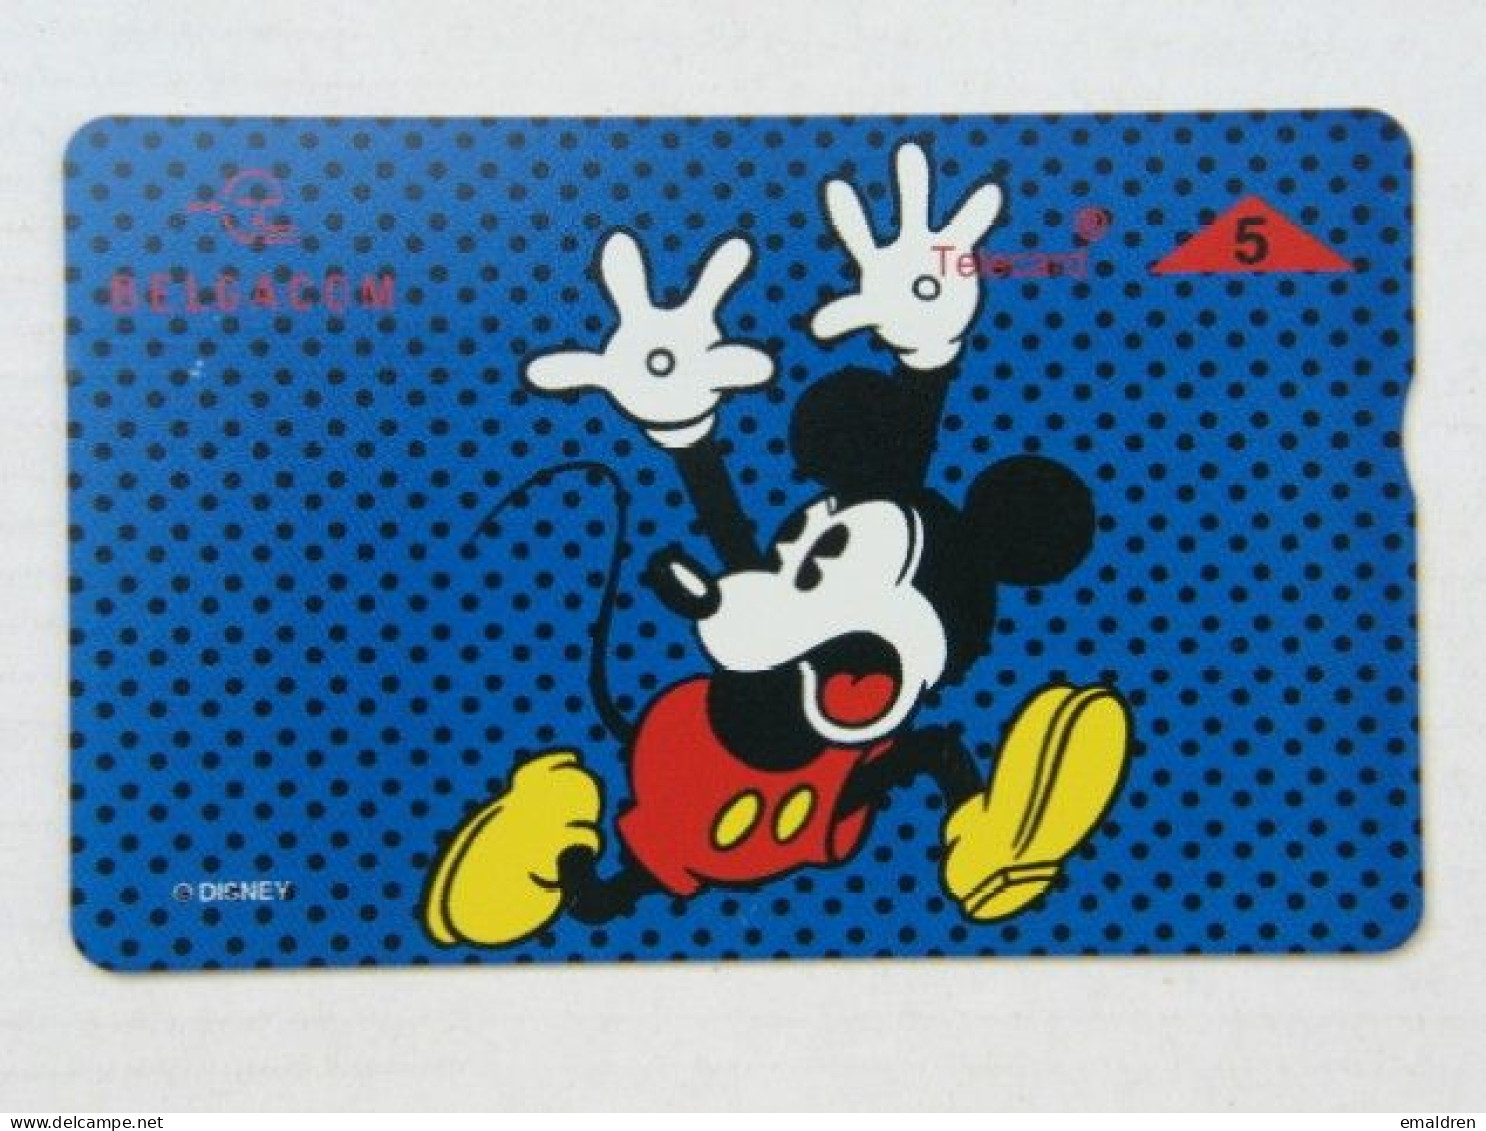 P377. Mickey Mouse. - Senza Chip